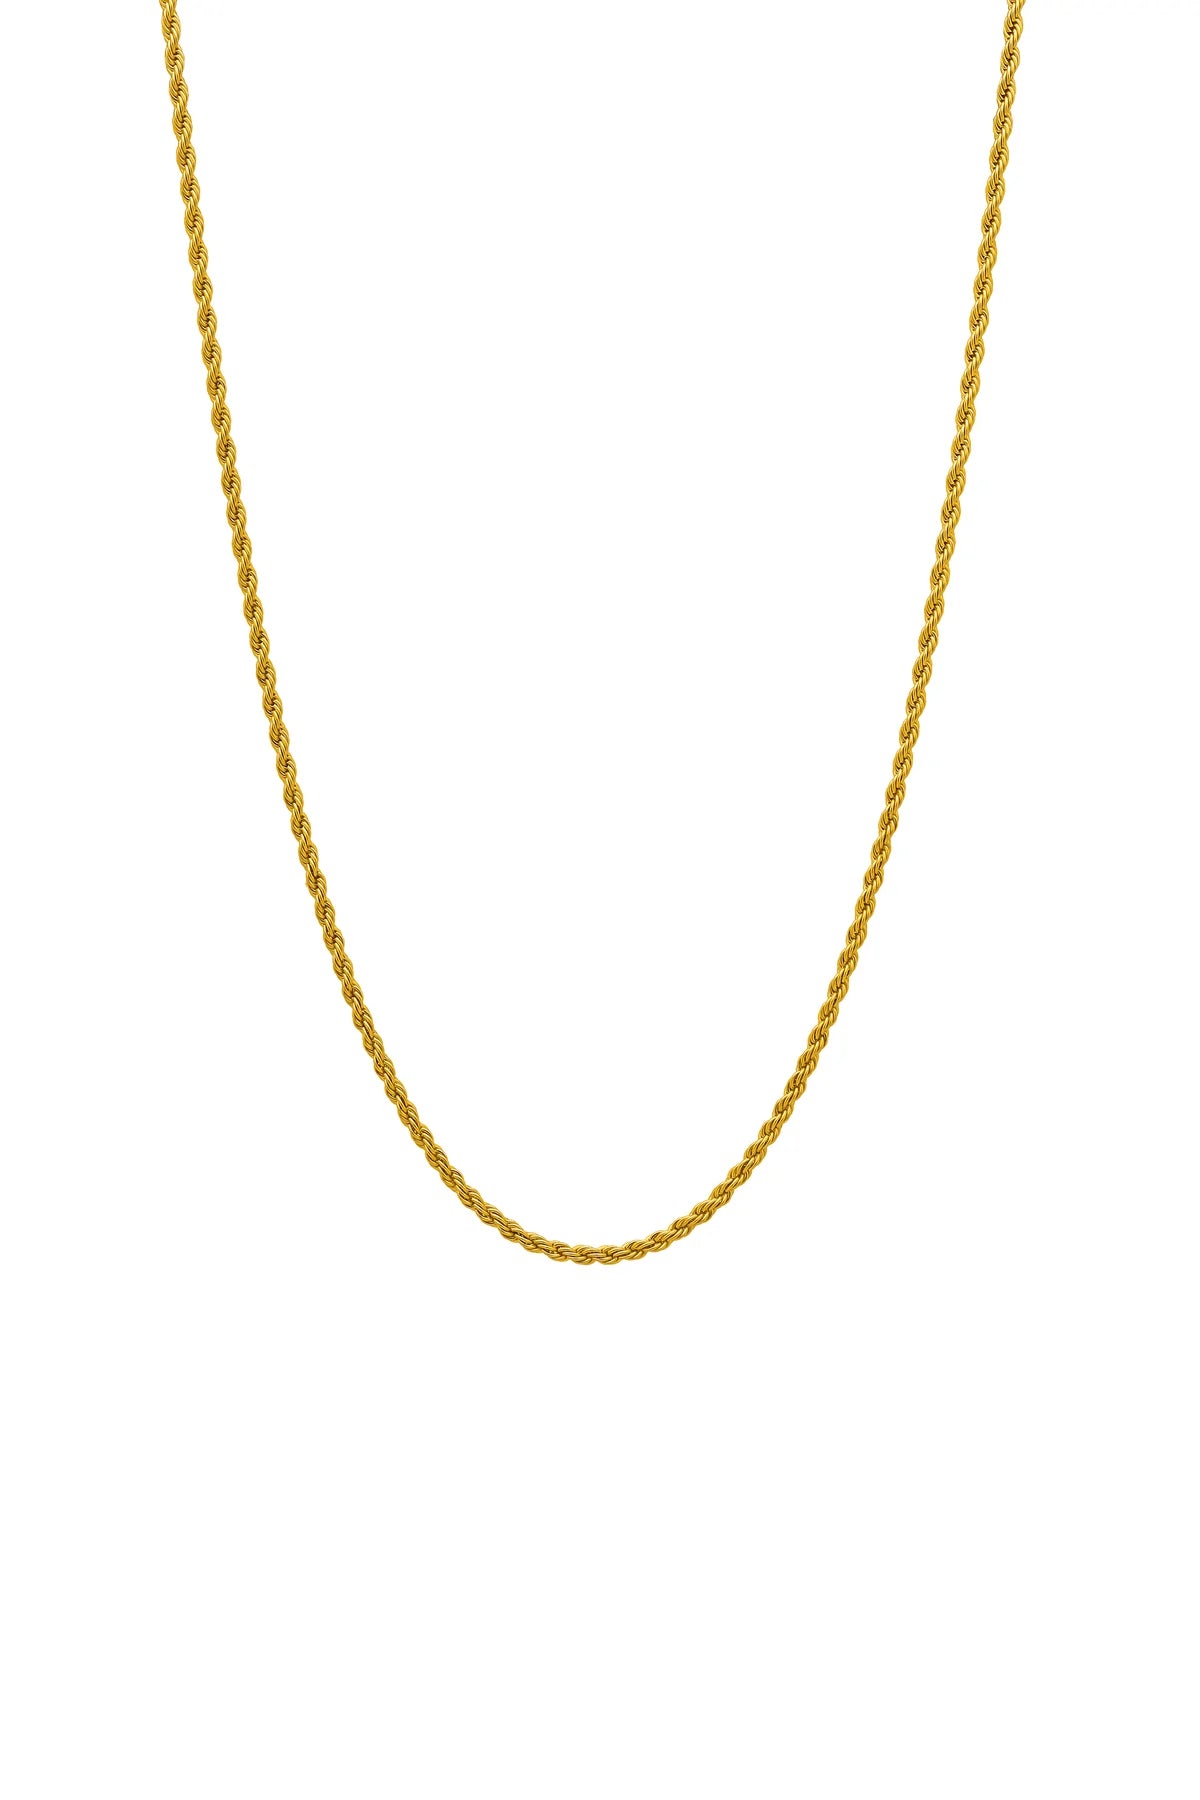 QUINTAS™ Rope Chain Necklace